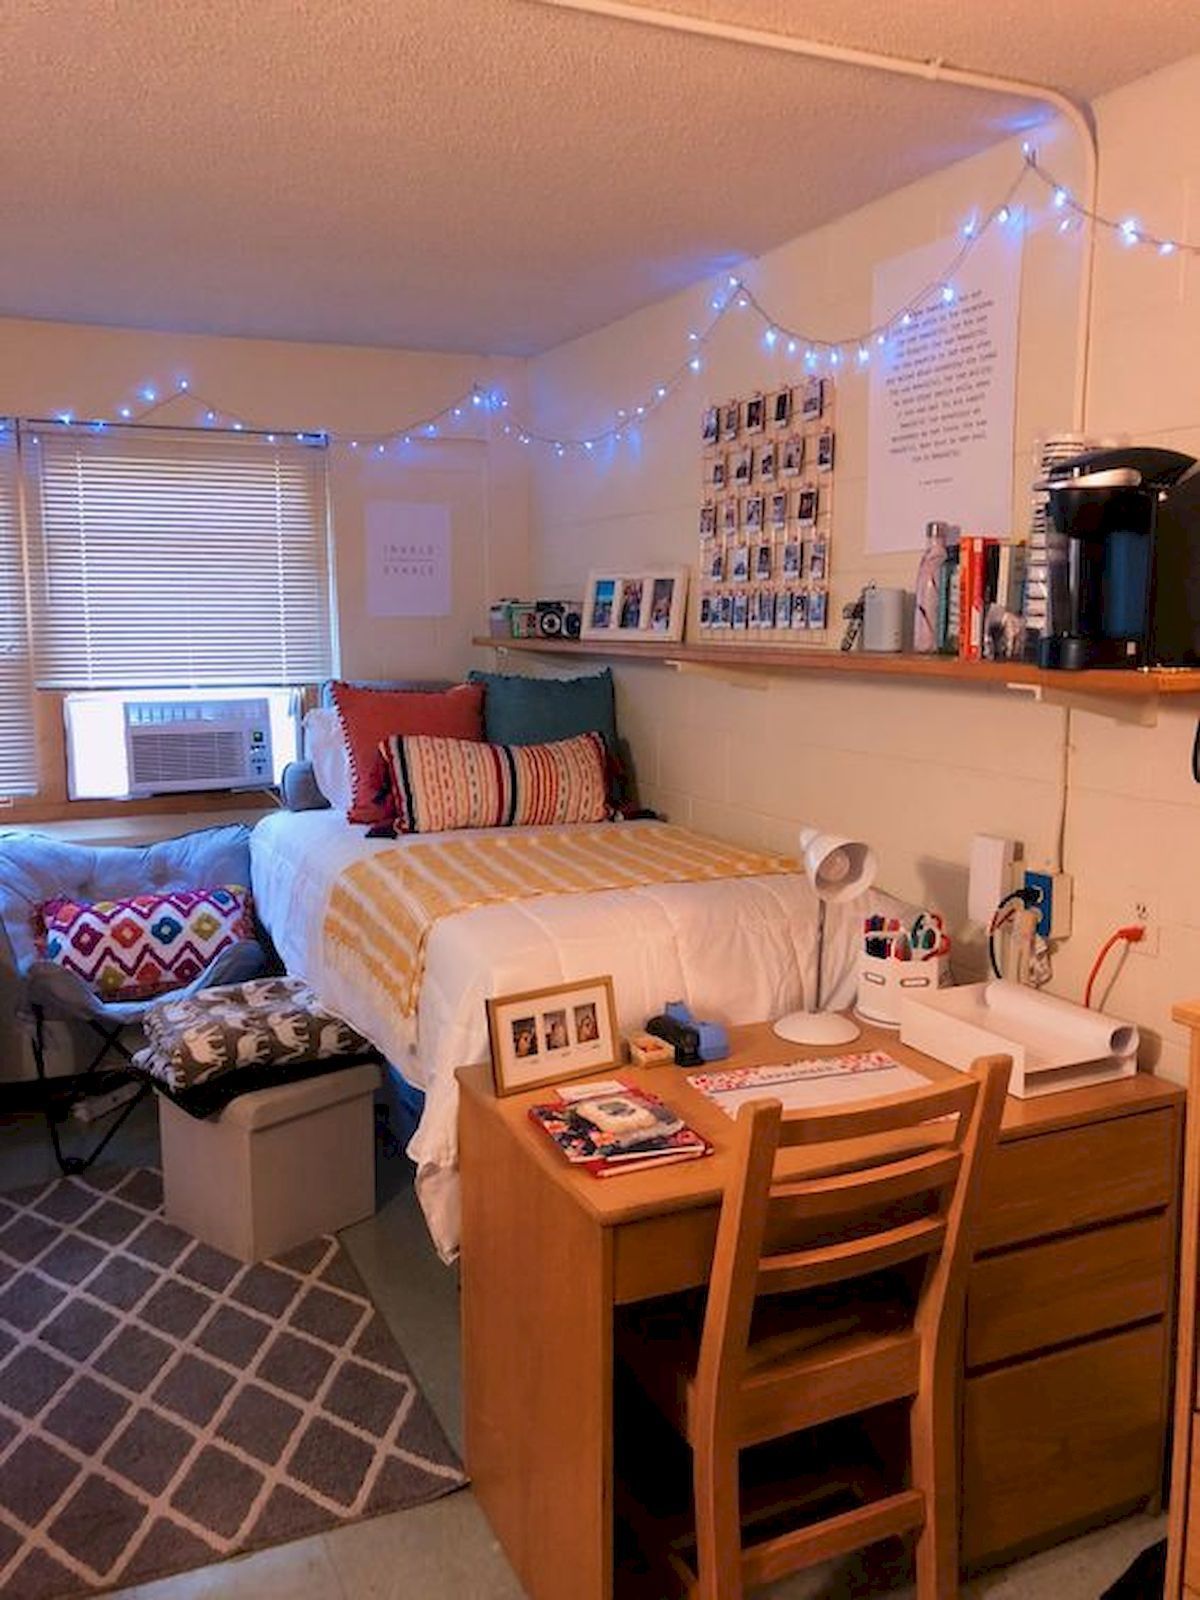 33 Awesome College Bedroom Decor Ideas And Remodel -   13 room decor Desk awesome
 ideas